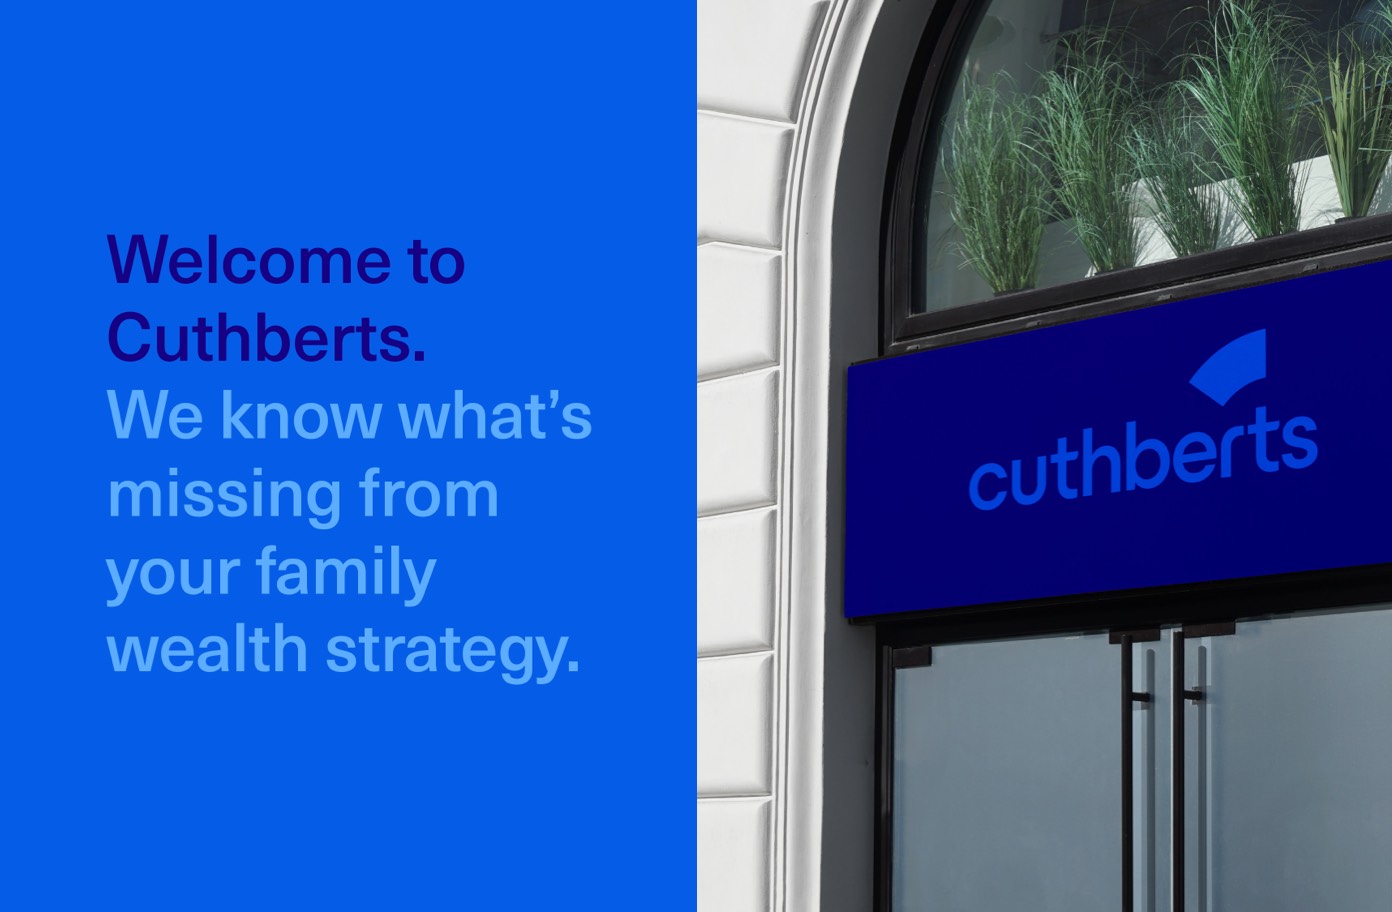 Brand statement and signage – Cuthberts